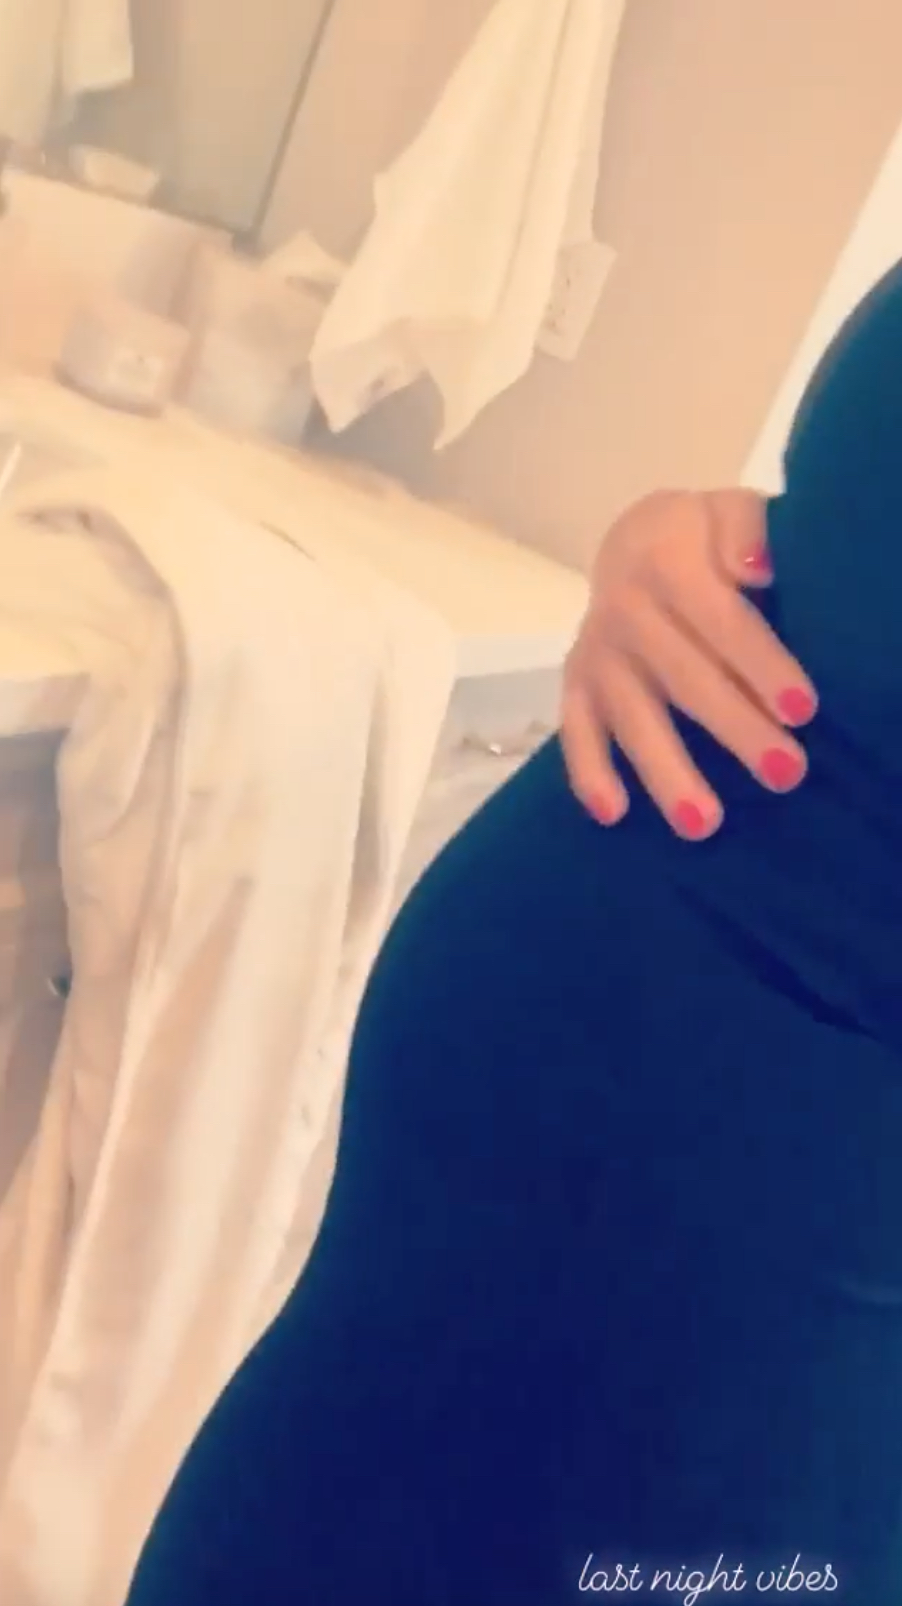 Nikki Bella Shows Off Pregnancy Curves I’m Fitted Black Dress: ‘My Bump Has Gotten So Much Bigger’